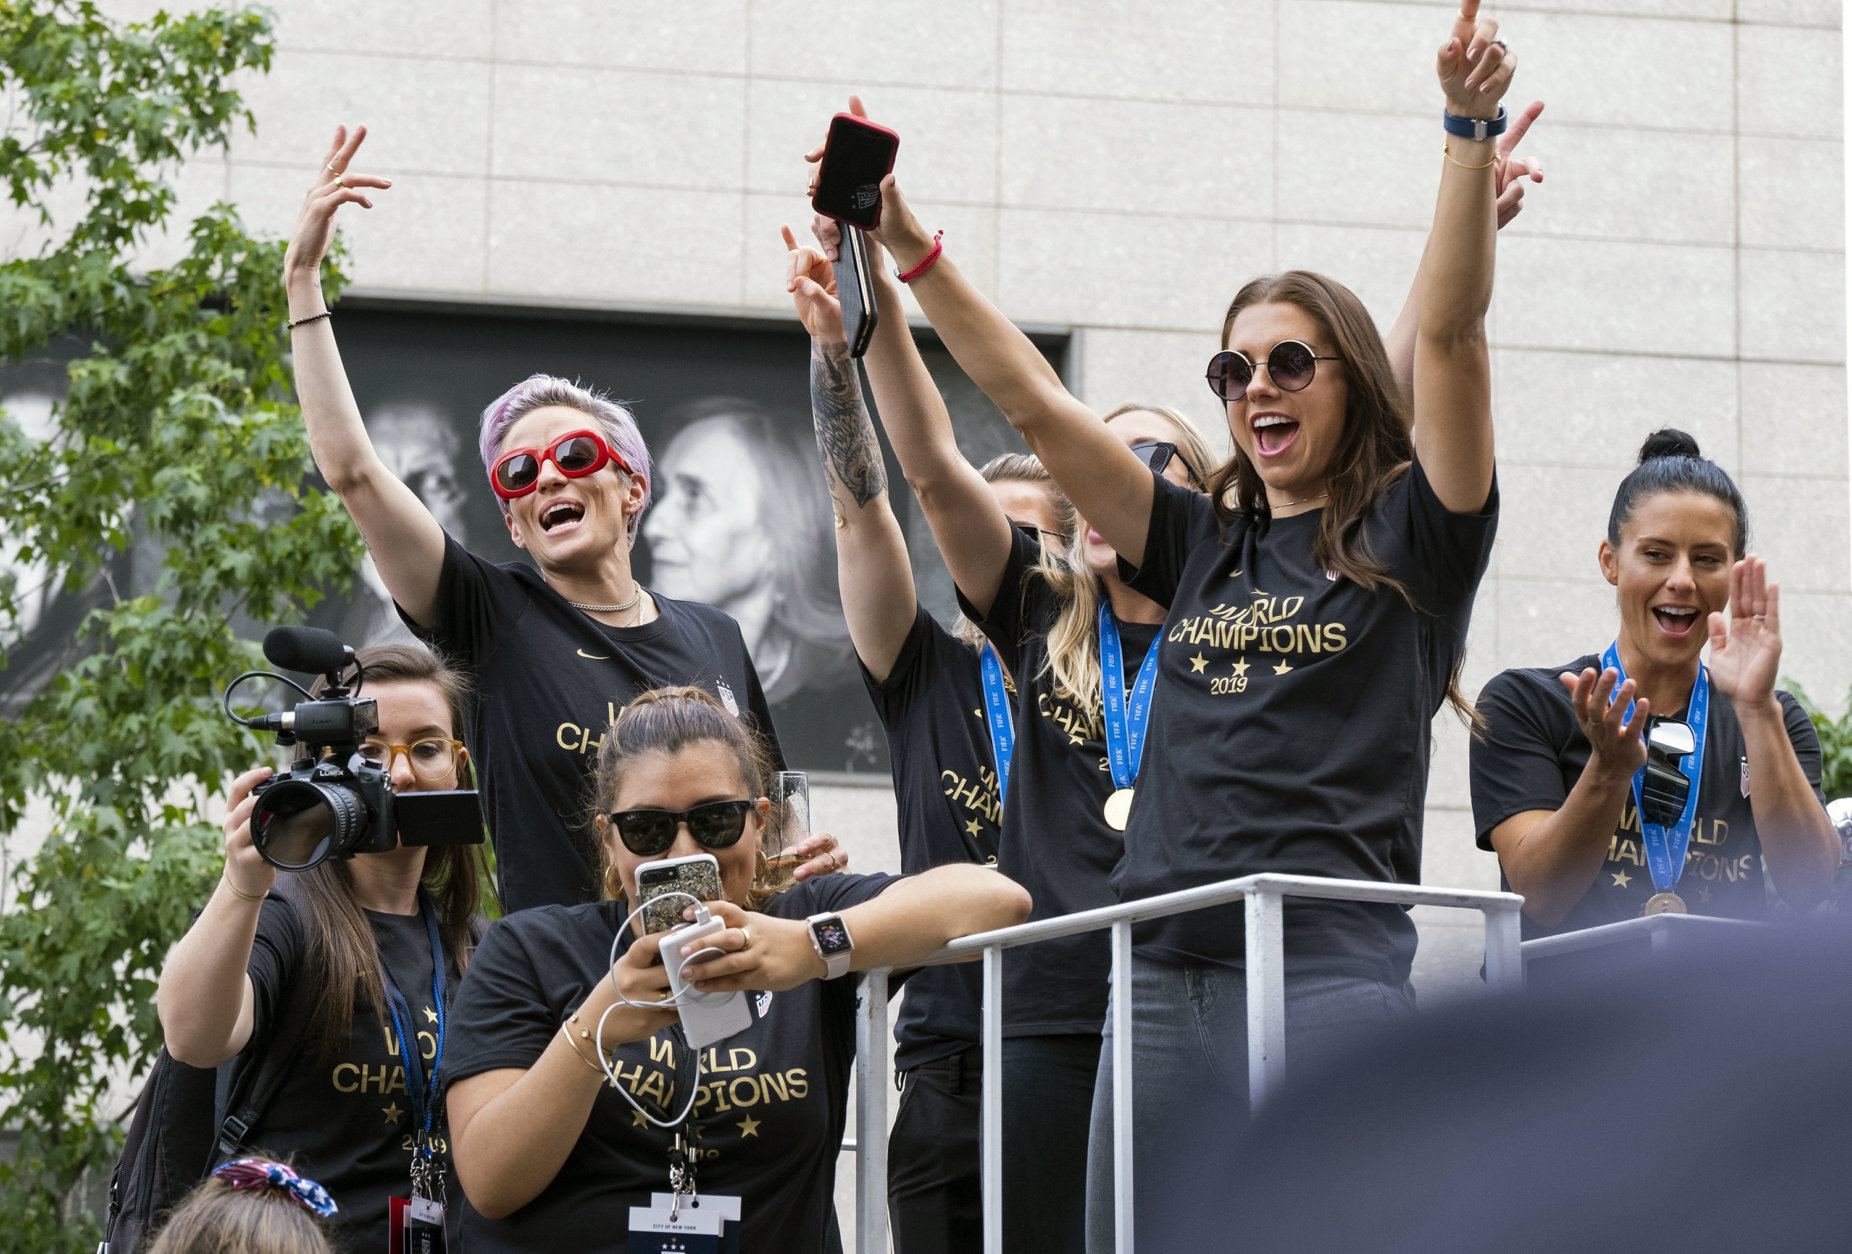 Members of the U.S. women's soccer team, including Megan Rapinoe, rear left, and Alex Morgan, right foreground, stand on a float before being honored with a ticker tape parade along the Canyon of Heroes in New York, Wednesday, July 10, 2019. The U.S. national team beat the Netherlands 2-0 to capture a record fourth Women's World Cup title. (AP Photo/Craig Ruttle)